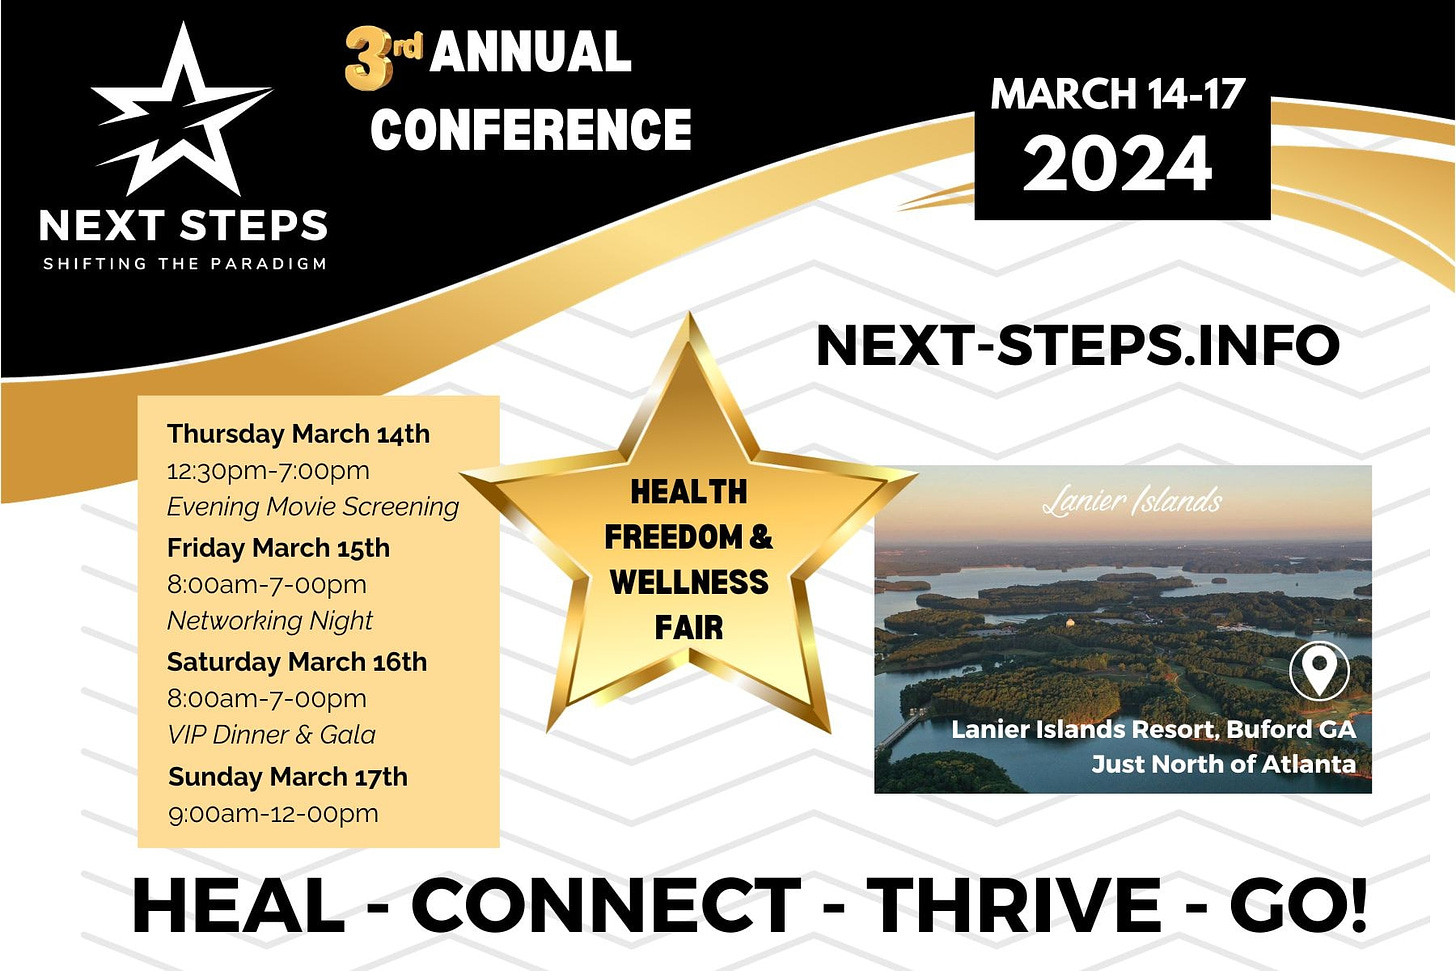 May be an image of one or more people, poster, magazine and text that says '3rd ANNUAL CONFERENCE NEXT STEPS SHIFTING THE PARADIGM MARCH 14-17 2024 NEXT-STEPS.INFO HEALTH FREEDOM & WELLNESS FAIR Thursday March 14th 12:30pm-7:00pm Evening Movie Screening Friday March 15th 8:00am-7-00pm Networking Night Saturday March 16th 8:00am- 8:00am-7-00pm VIP Dinner & Gala Sunday March 17th 9:00am-12-00pm HEAL CONNECT THRIVE Lanierslan Lanier /slands Lanier Islands Resort, Buford GA Just North of Atlanta GO!'